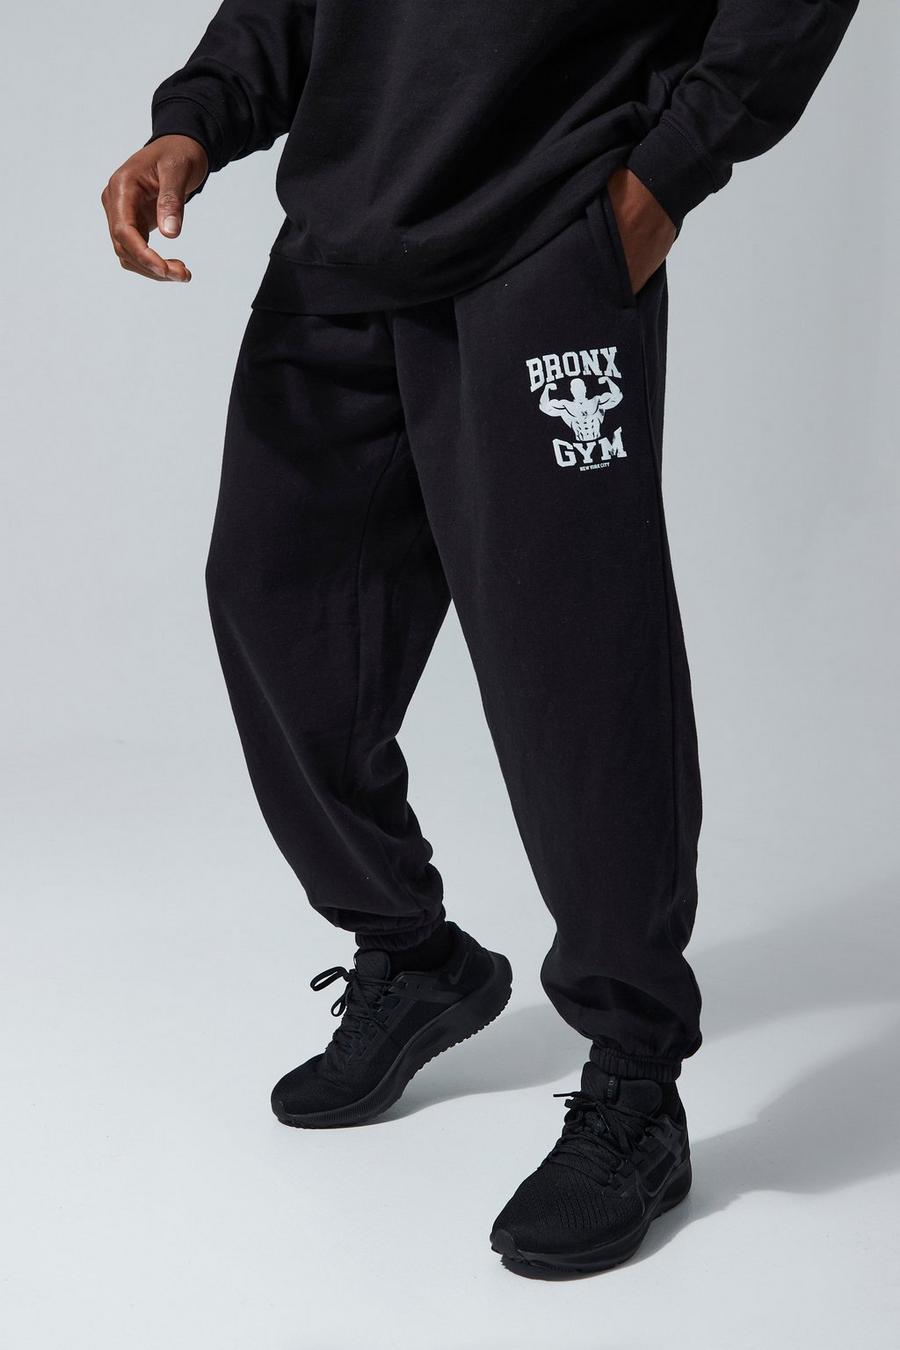 THE GYM PEOPLE Athletic Joggers for Women Sweatpants with Pockets